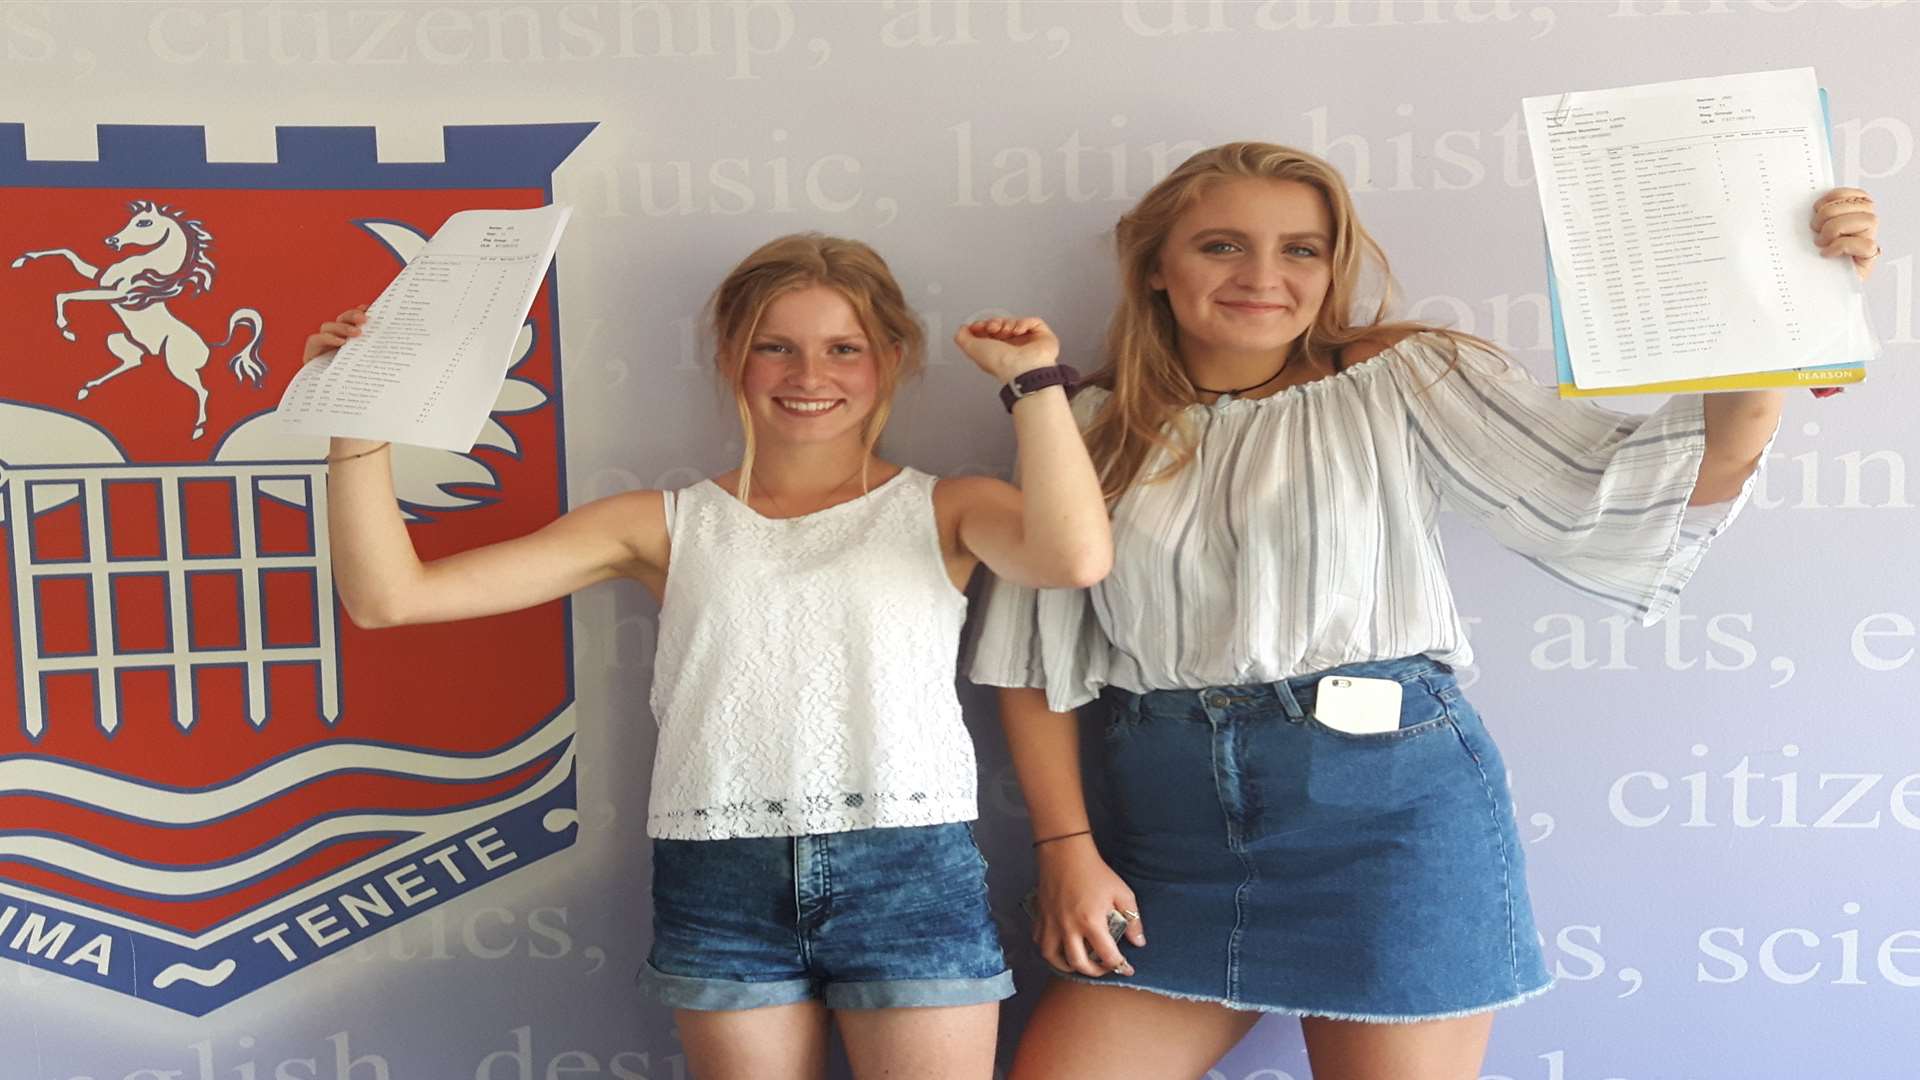 Kristen Hayes and Jessica Lyons celebrate great results